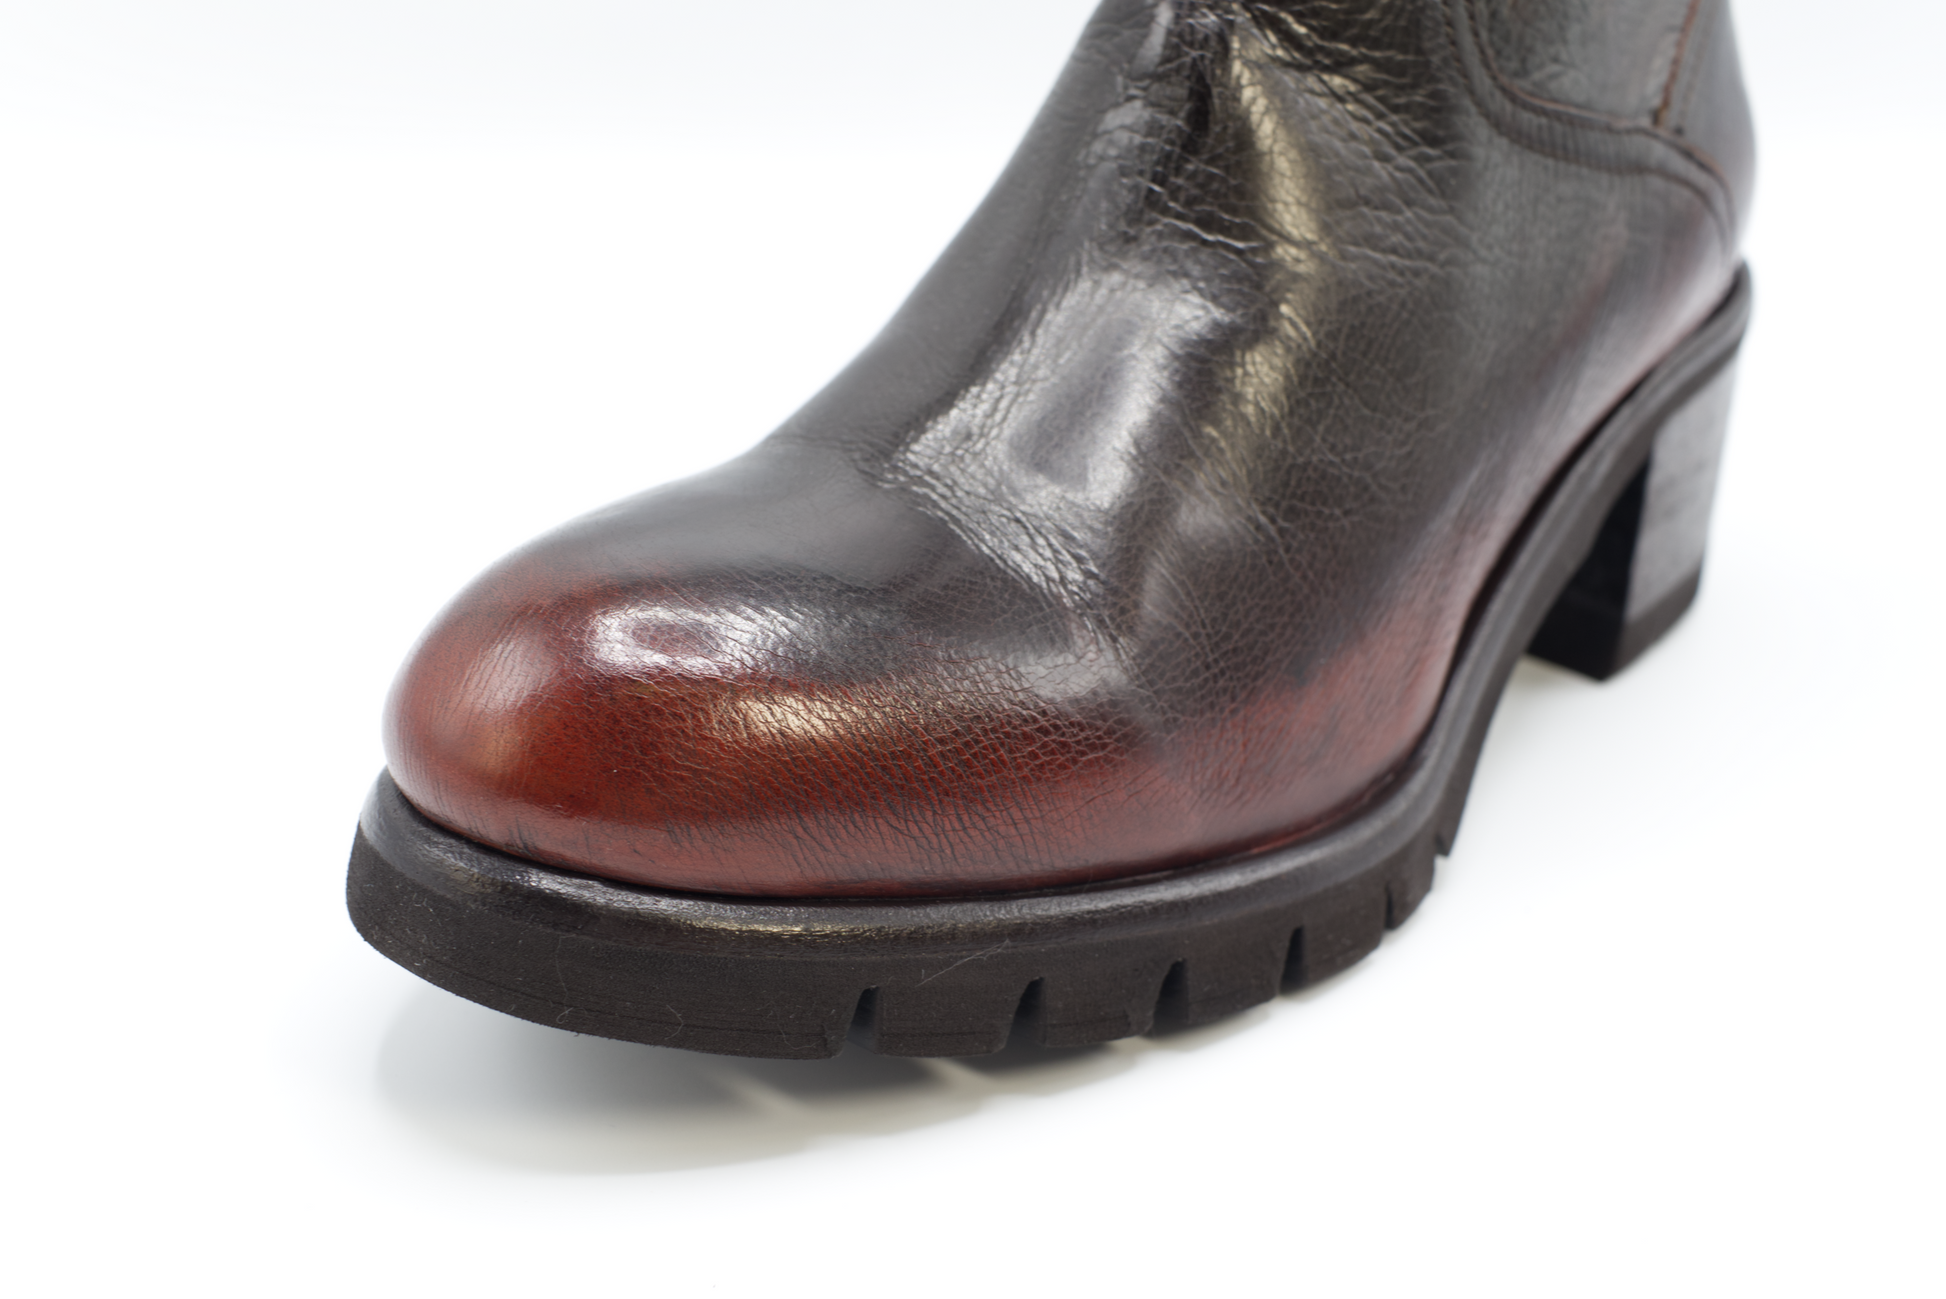 Shop Handmade Italian Leather Calpierre Women's Chunky Sole Leather Ankle Boot or browse our range of hand-made Italian heels, sandals, and sneakers for men and women in leather or suede. We deliver to the USA and Canada & offer multiple payment plans as well as accept multiple safe & secure payment methods. DT375-P